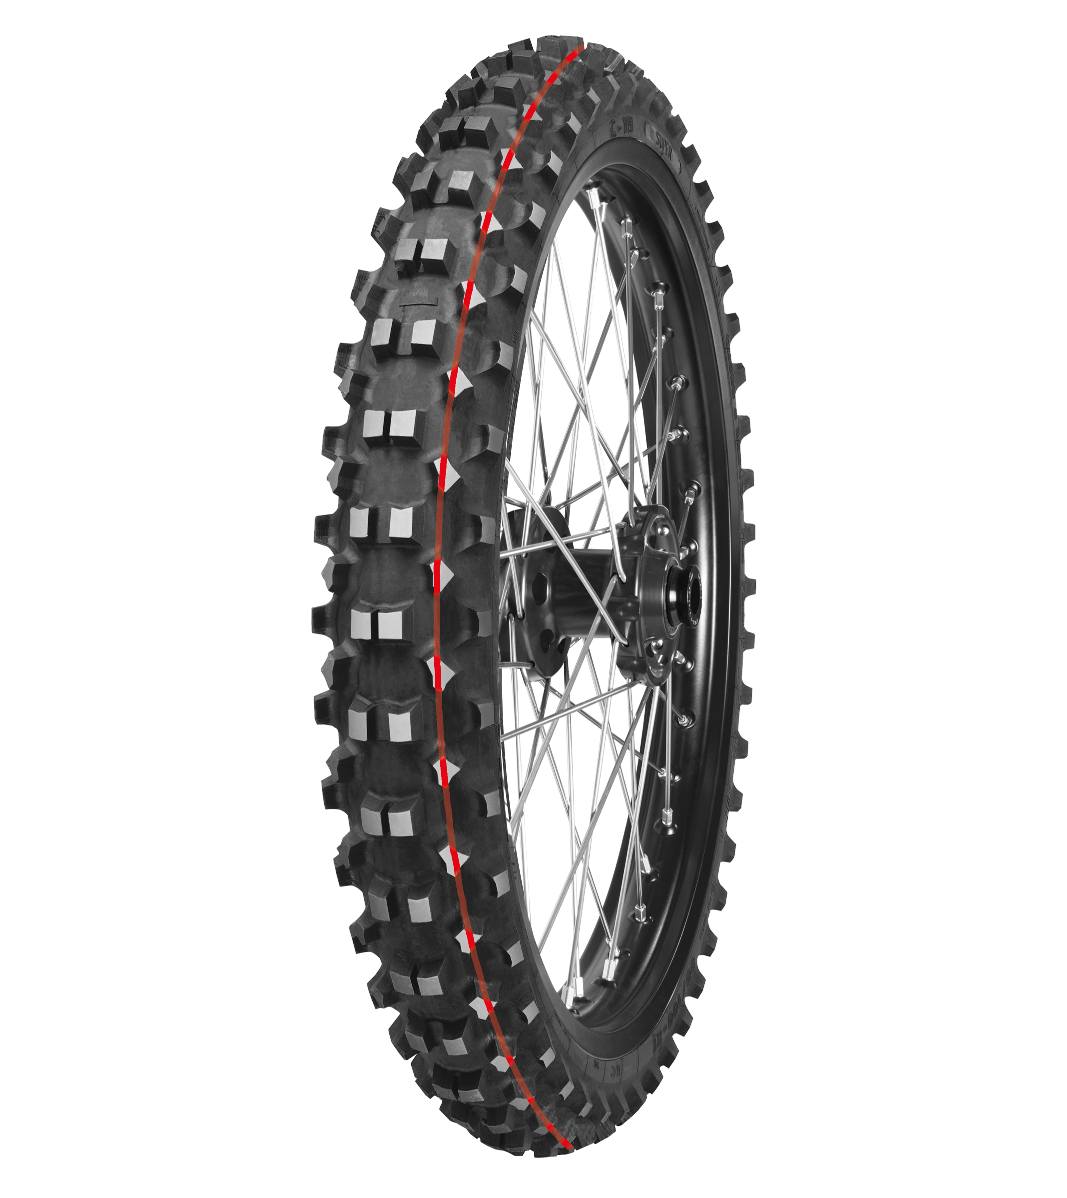 Mitas C-19 EAGLE 2.50-12 Motocross Competition Off-Road INTERMEDIATE TERRAIN 37M Red Tube Front Tire, 226022, 2.50-12, C-19 Eagle, Front, Motocross, Motocross Competition, Off-Road, Tires - Imported and distributed in North &amp; South America by Lindeco Genuine Powersports - Premier Powersports Equipment and Accessories for Motorcycle Enthusiasts, Professional Riders and Dealers.